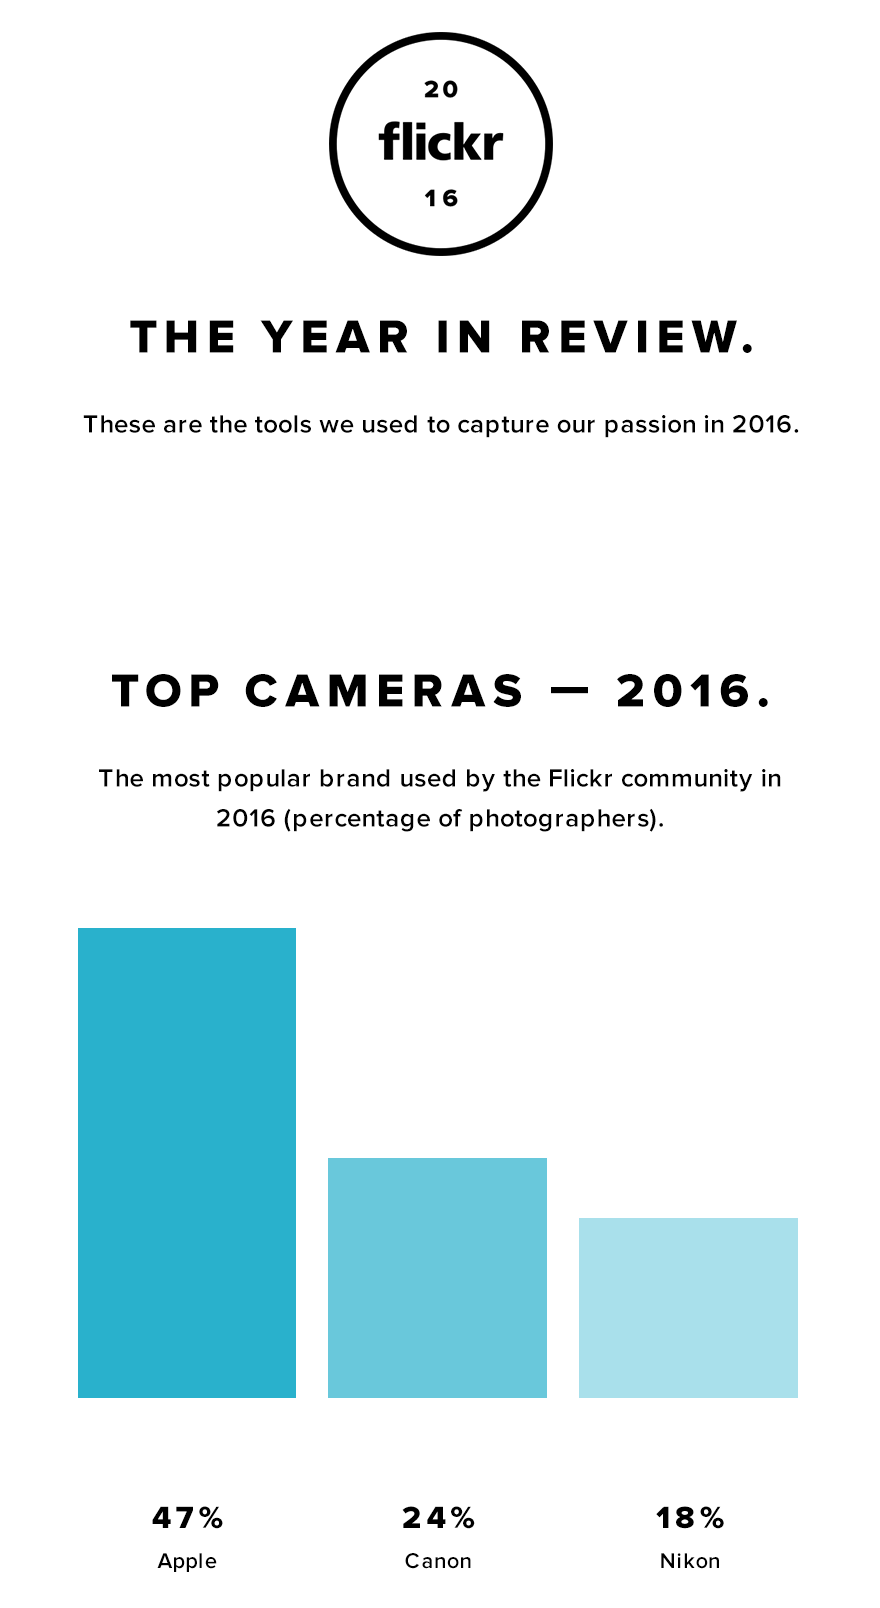 iphone account for 8 of top 10 cameras in 2016 flickr report 01a